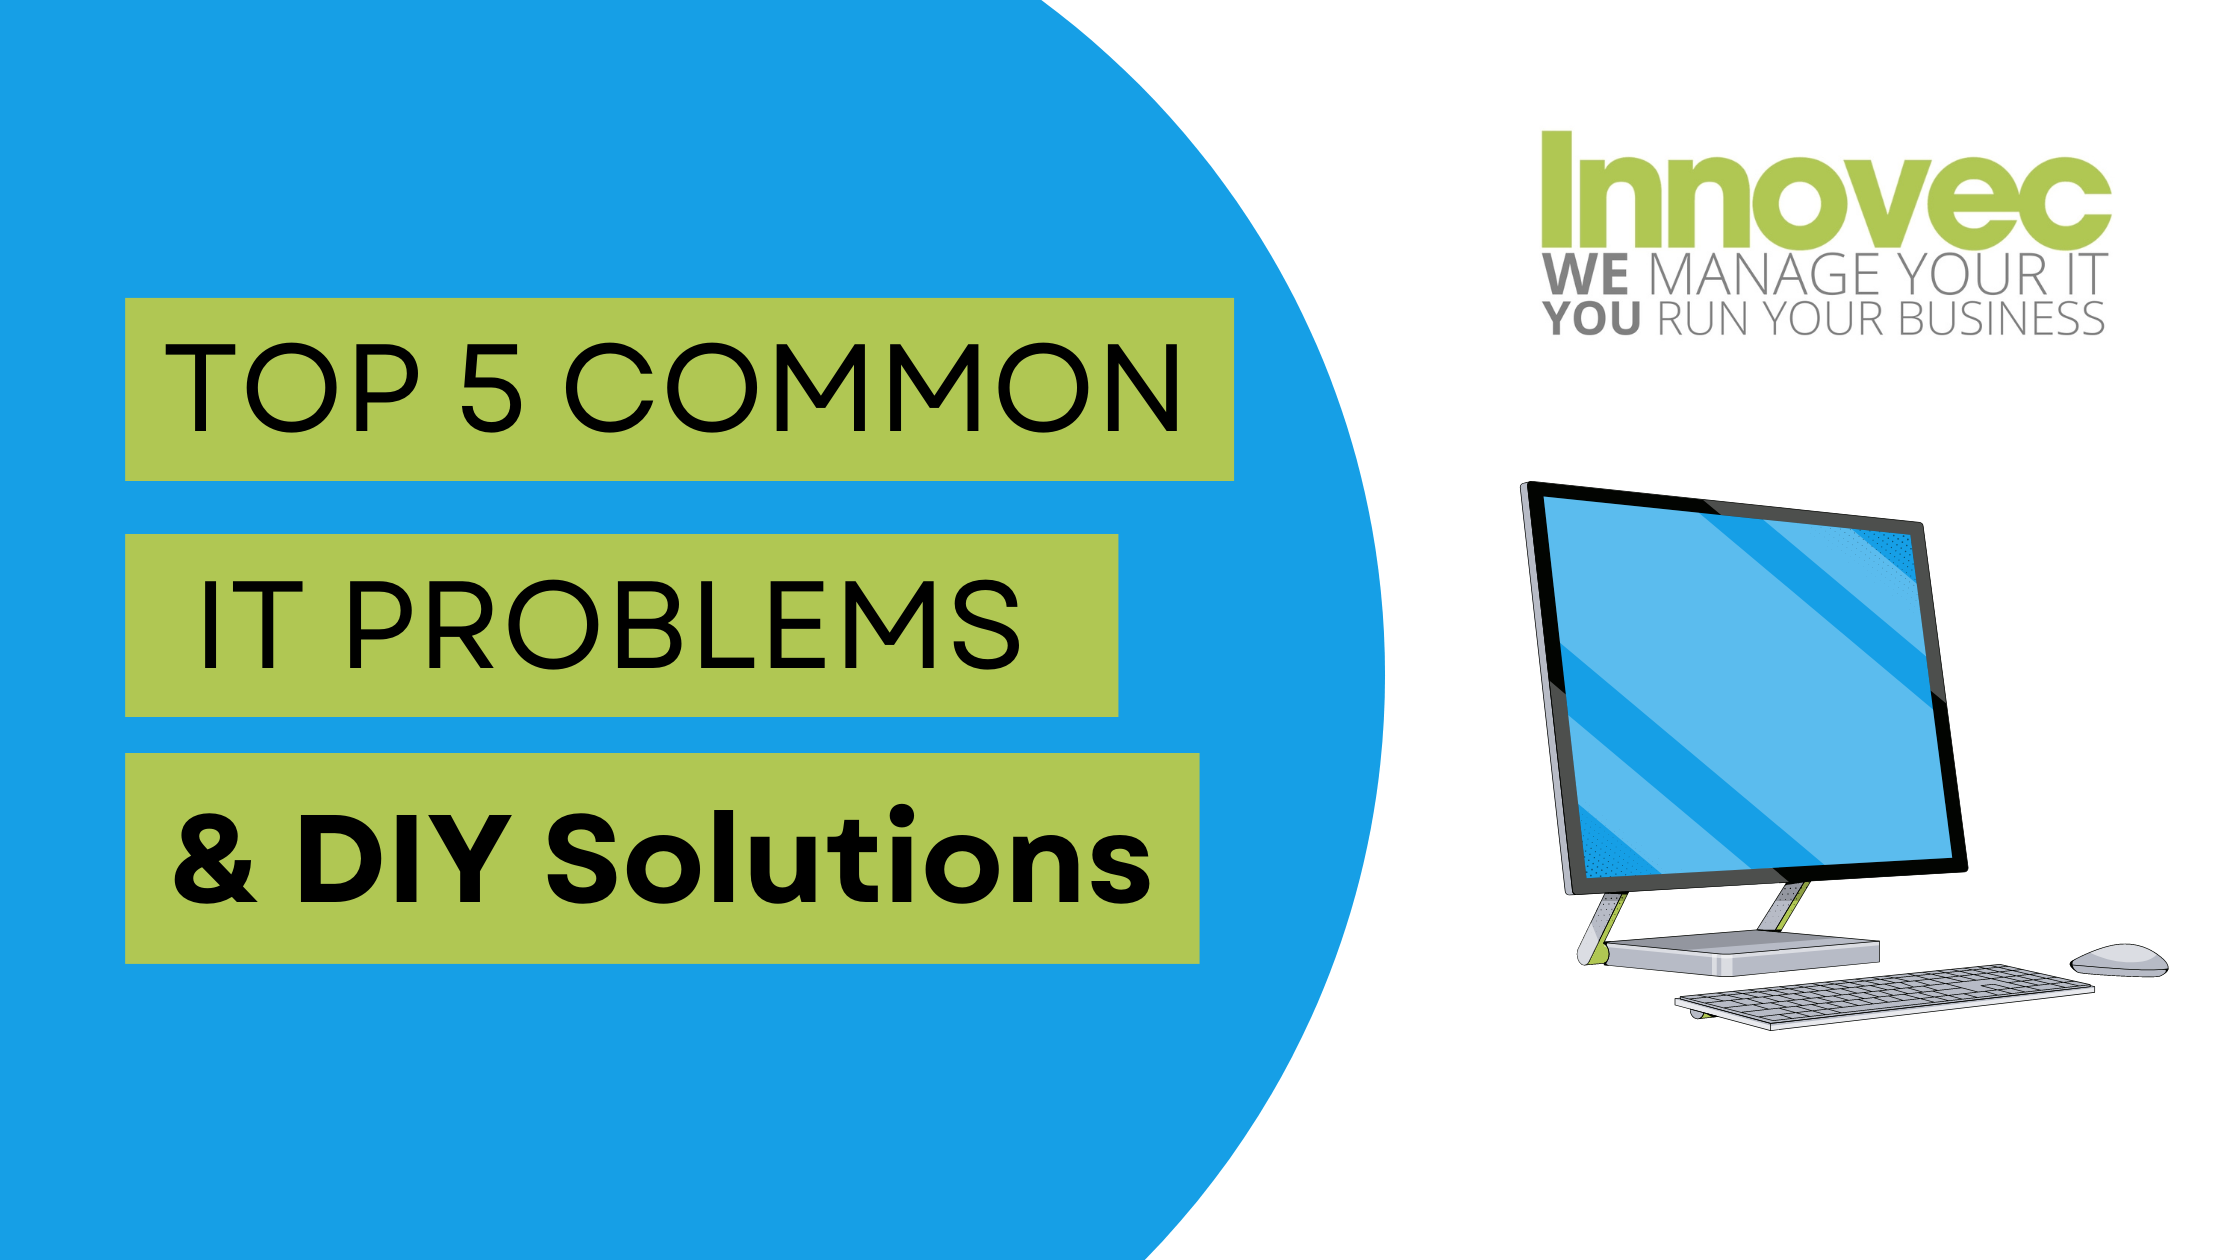 Top 5 Common IT Problems & DIY Solutions